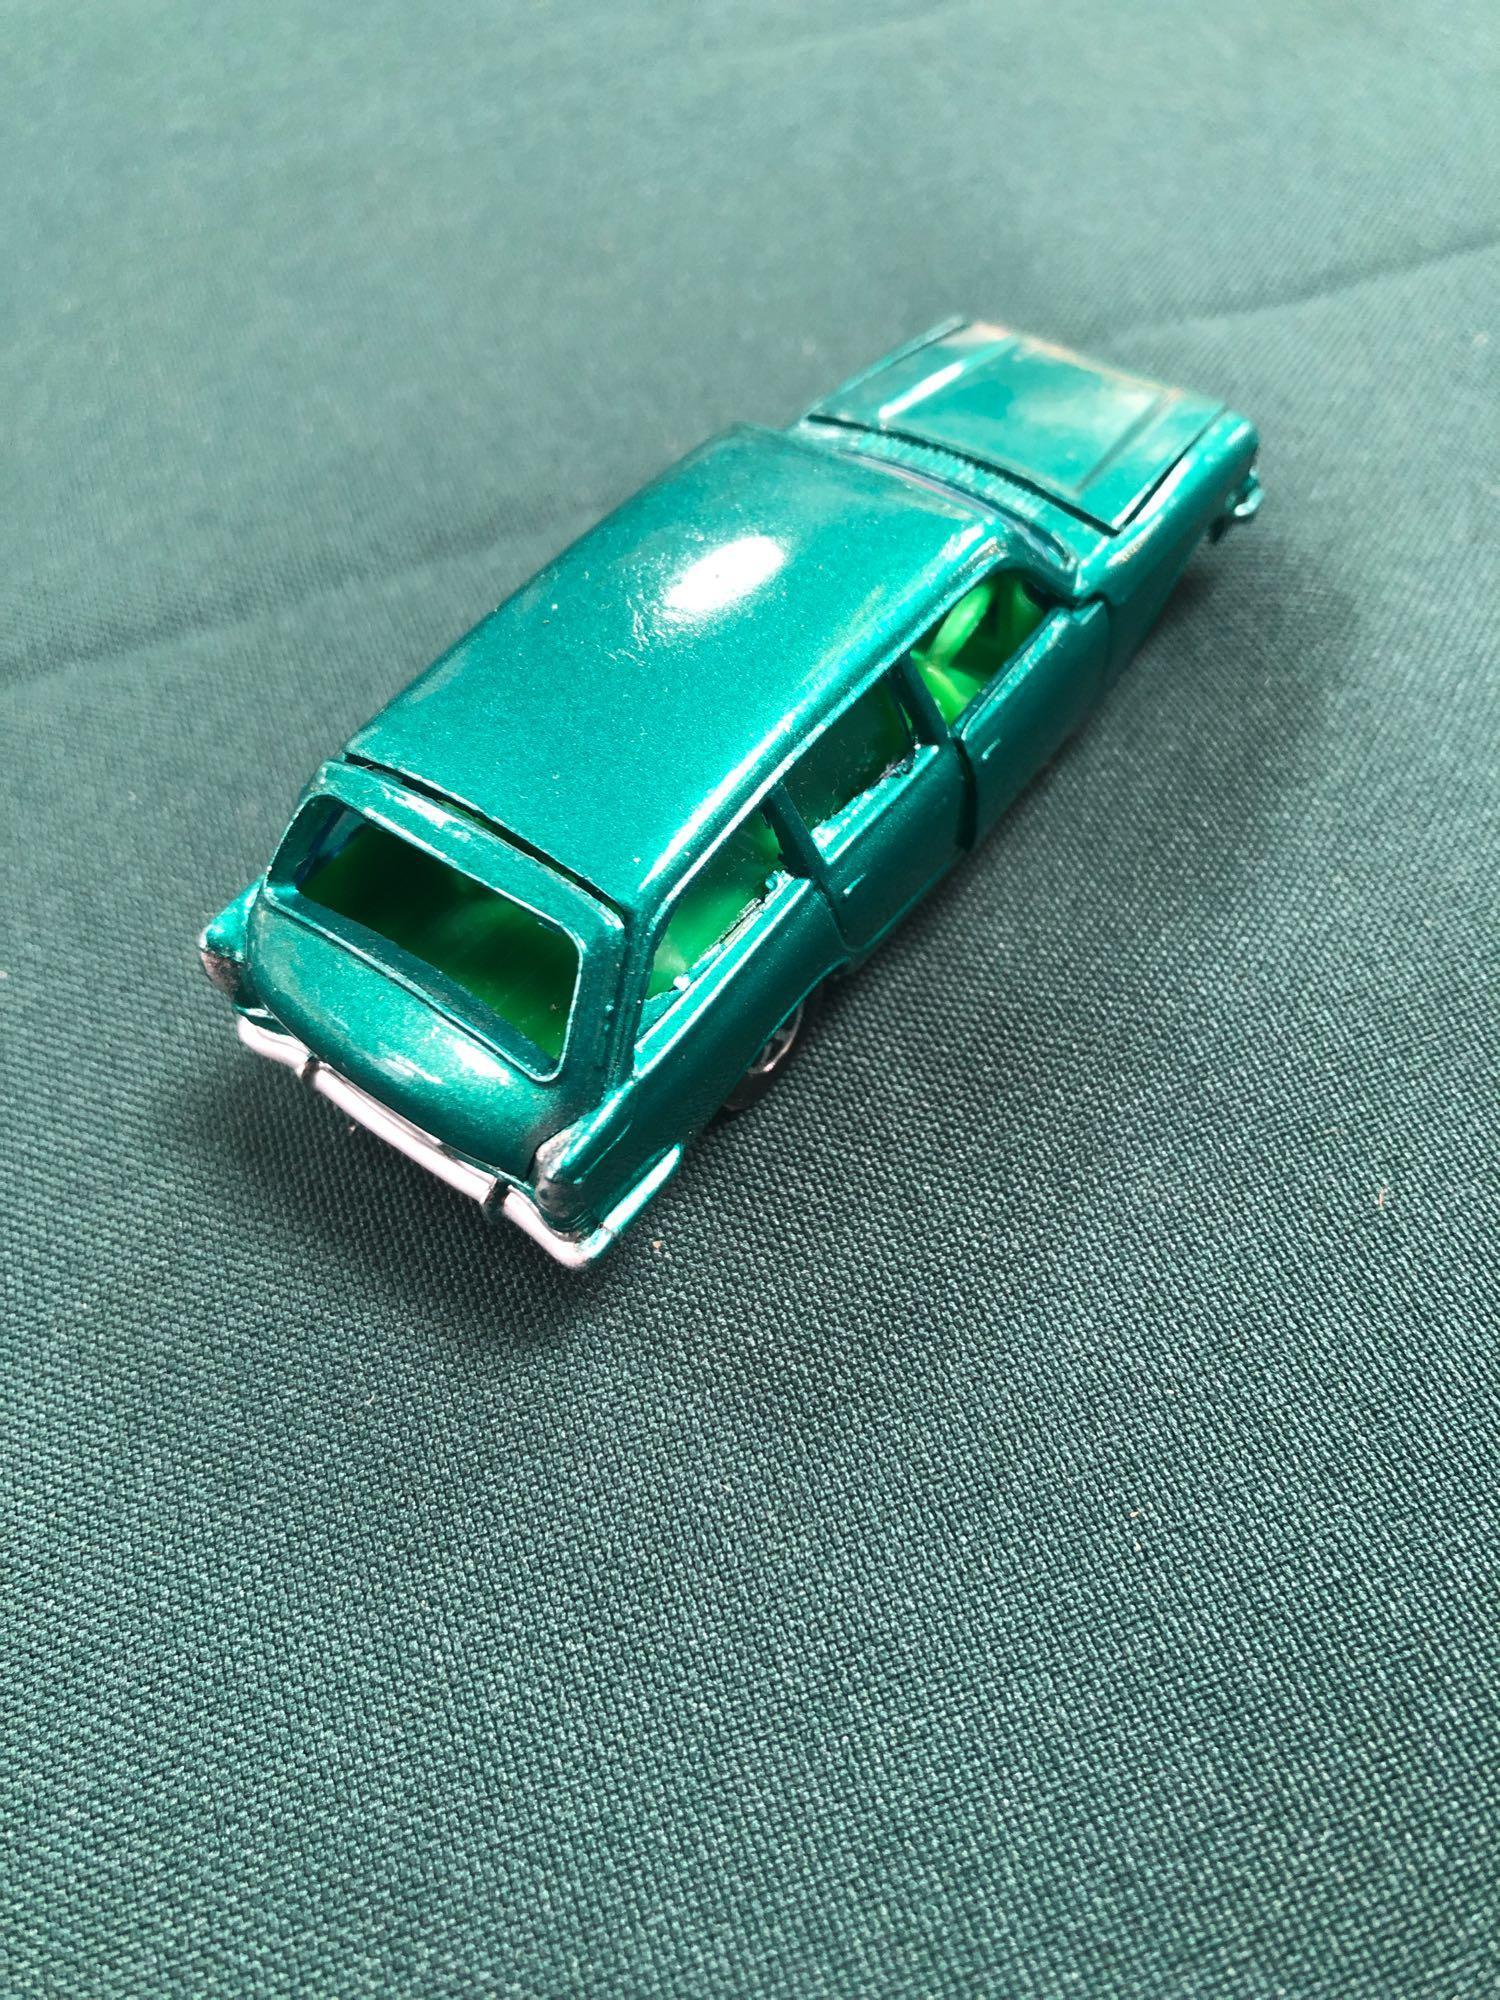 Lone Star Flyers Diecast Model #14 Ford (GB) Zodiac Mark III Estate In Green With Green Interior - Image 3 of 3